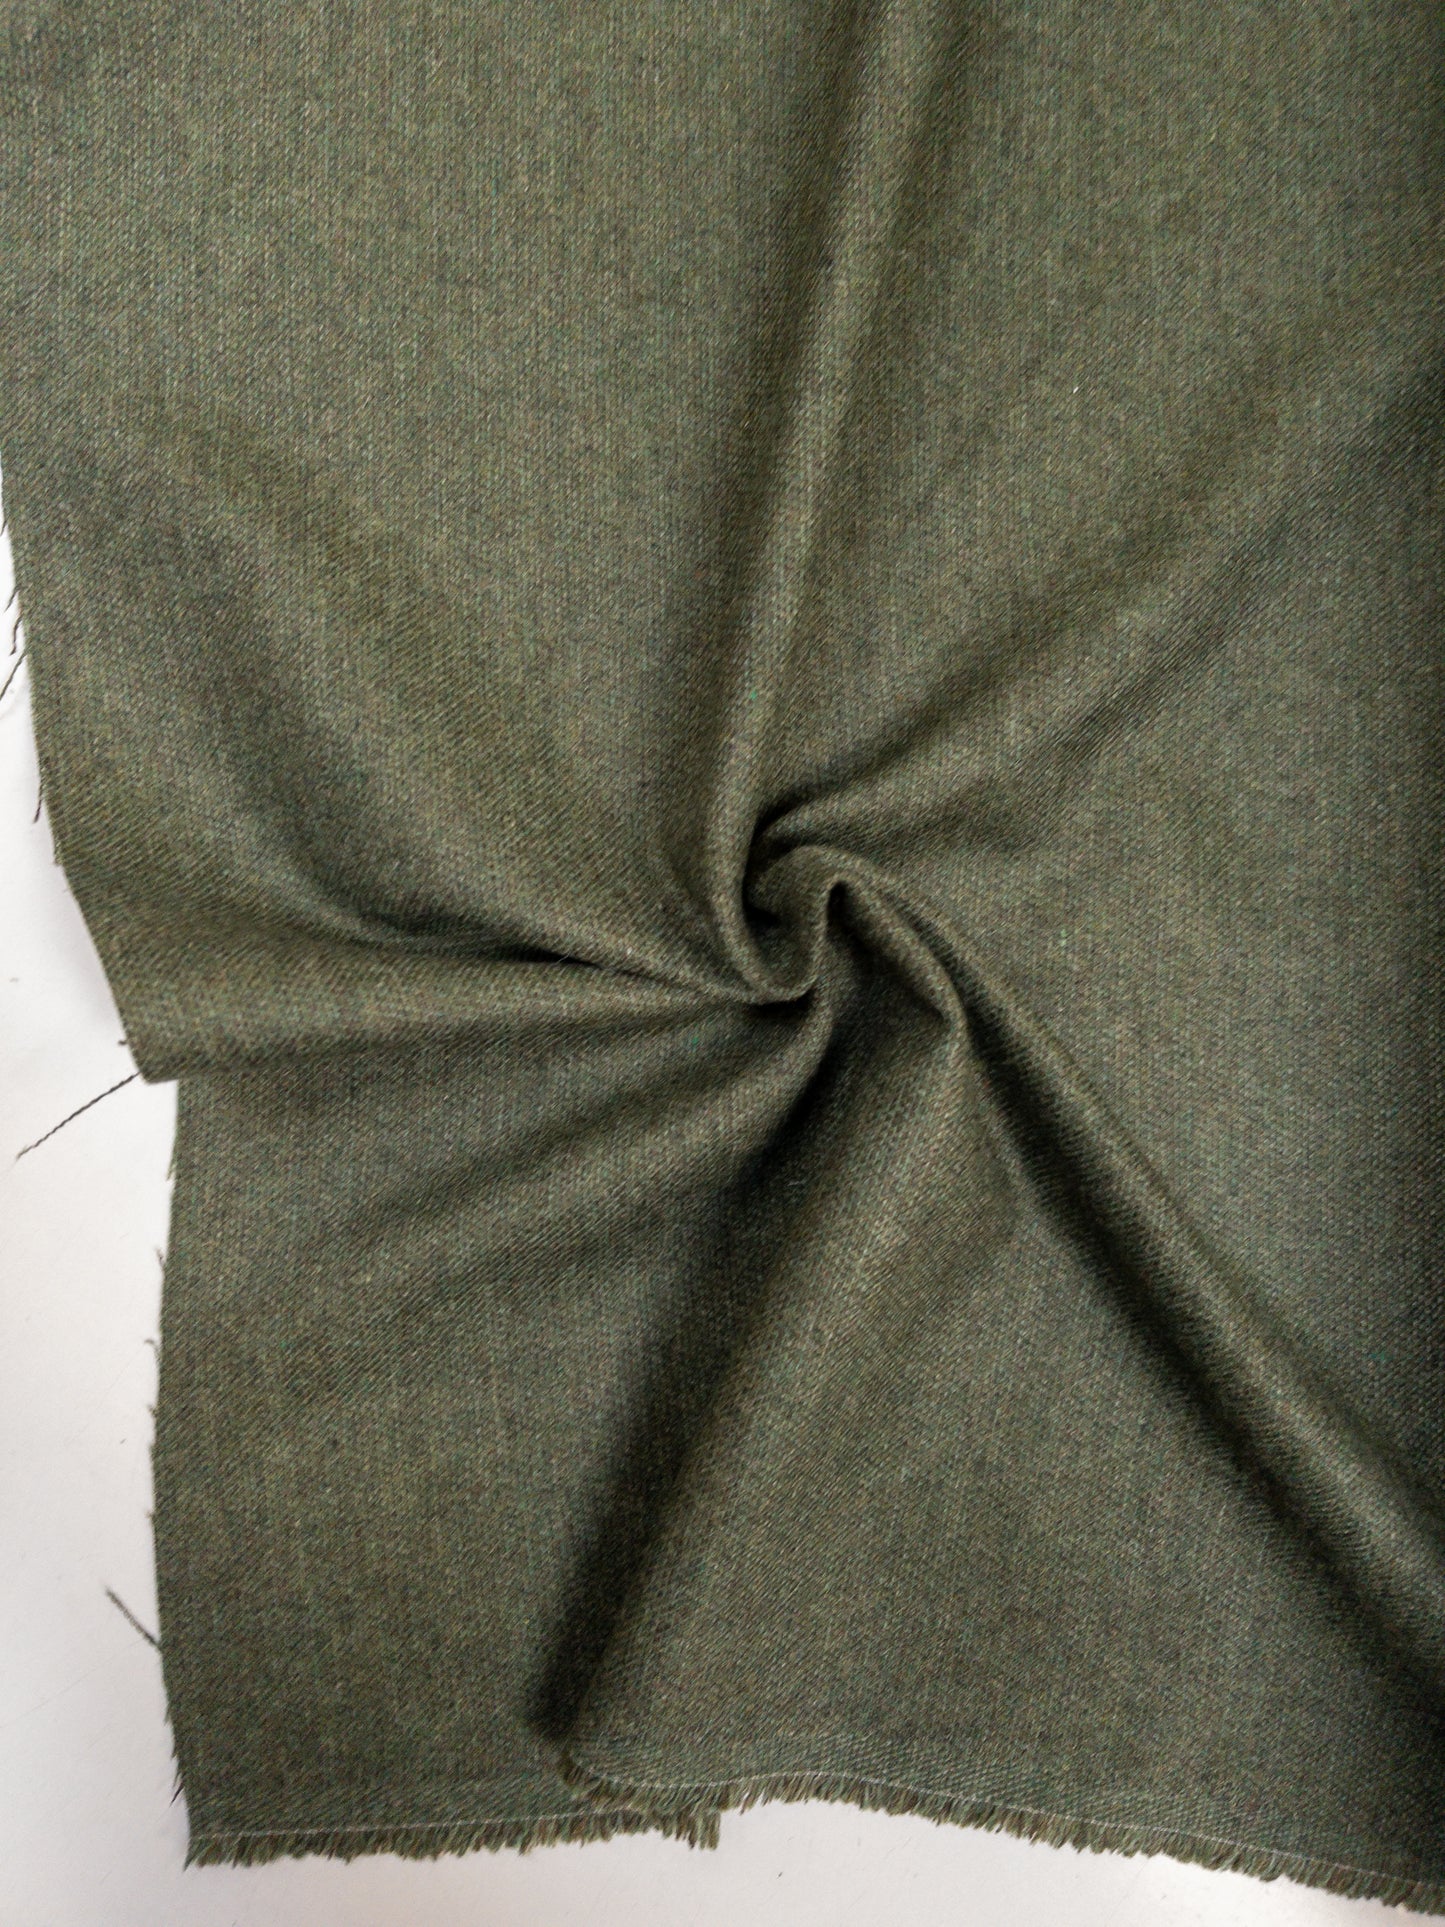 Wool fabric medium thickness color: Green WD15